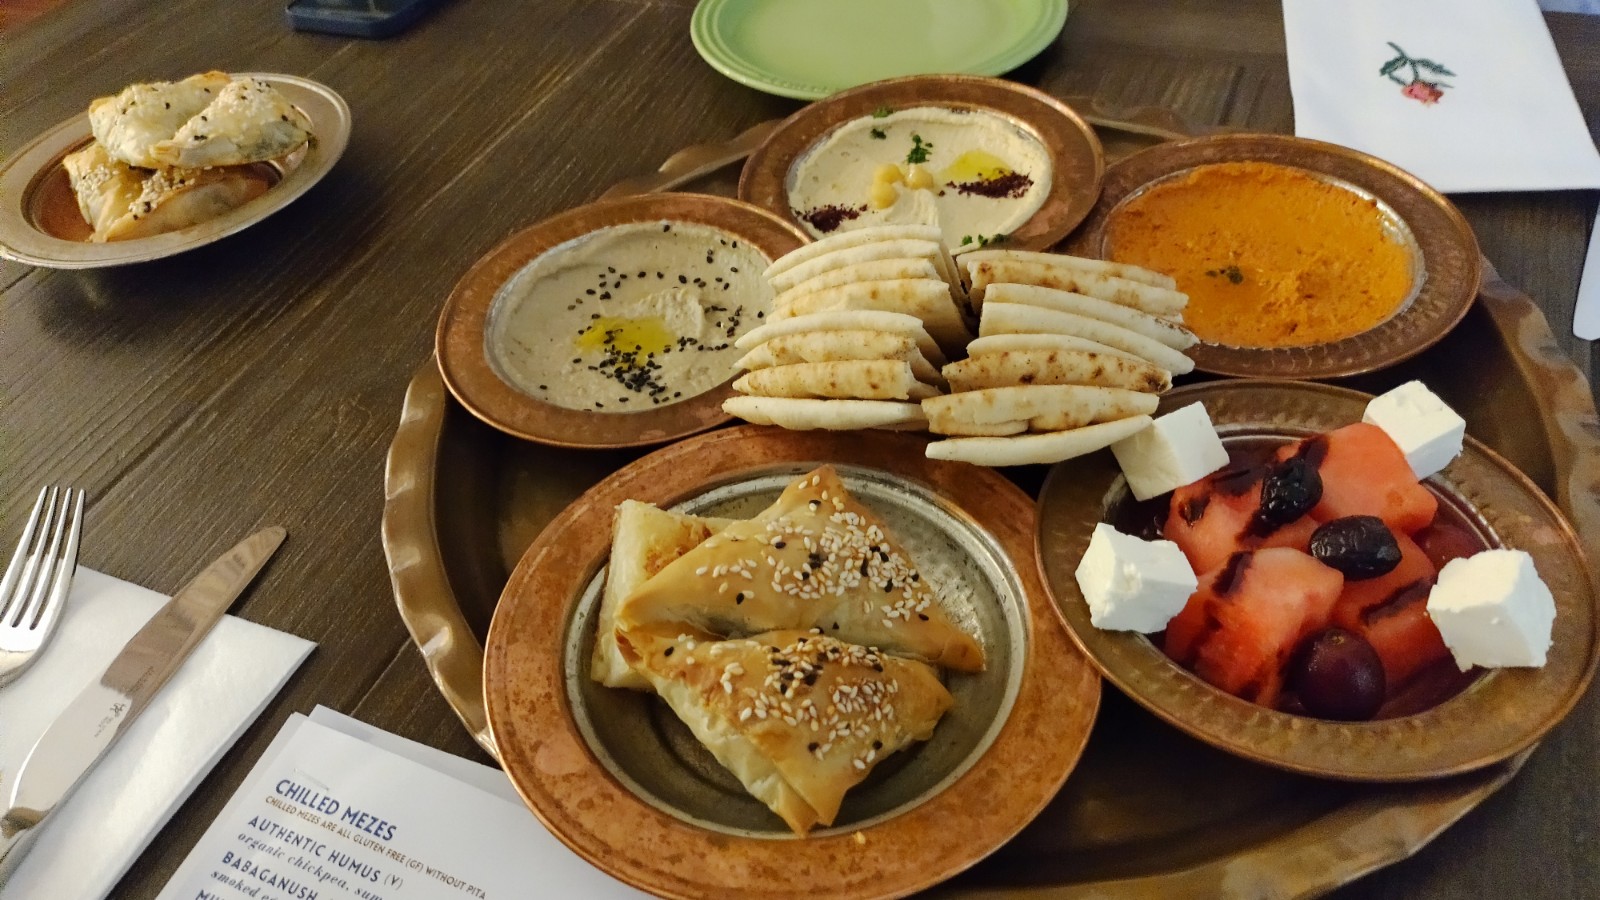 PICTURE OF THE MEZE PLATTER.